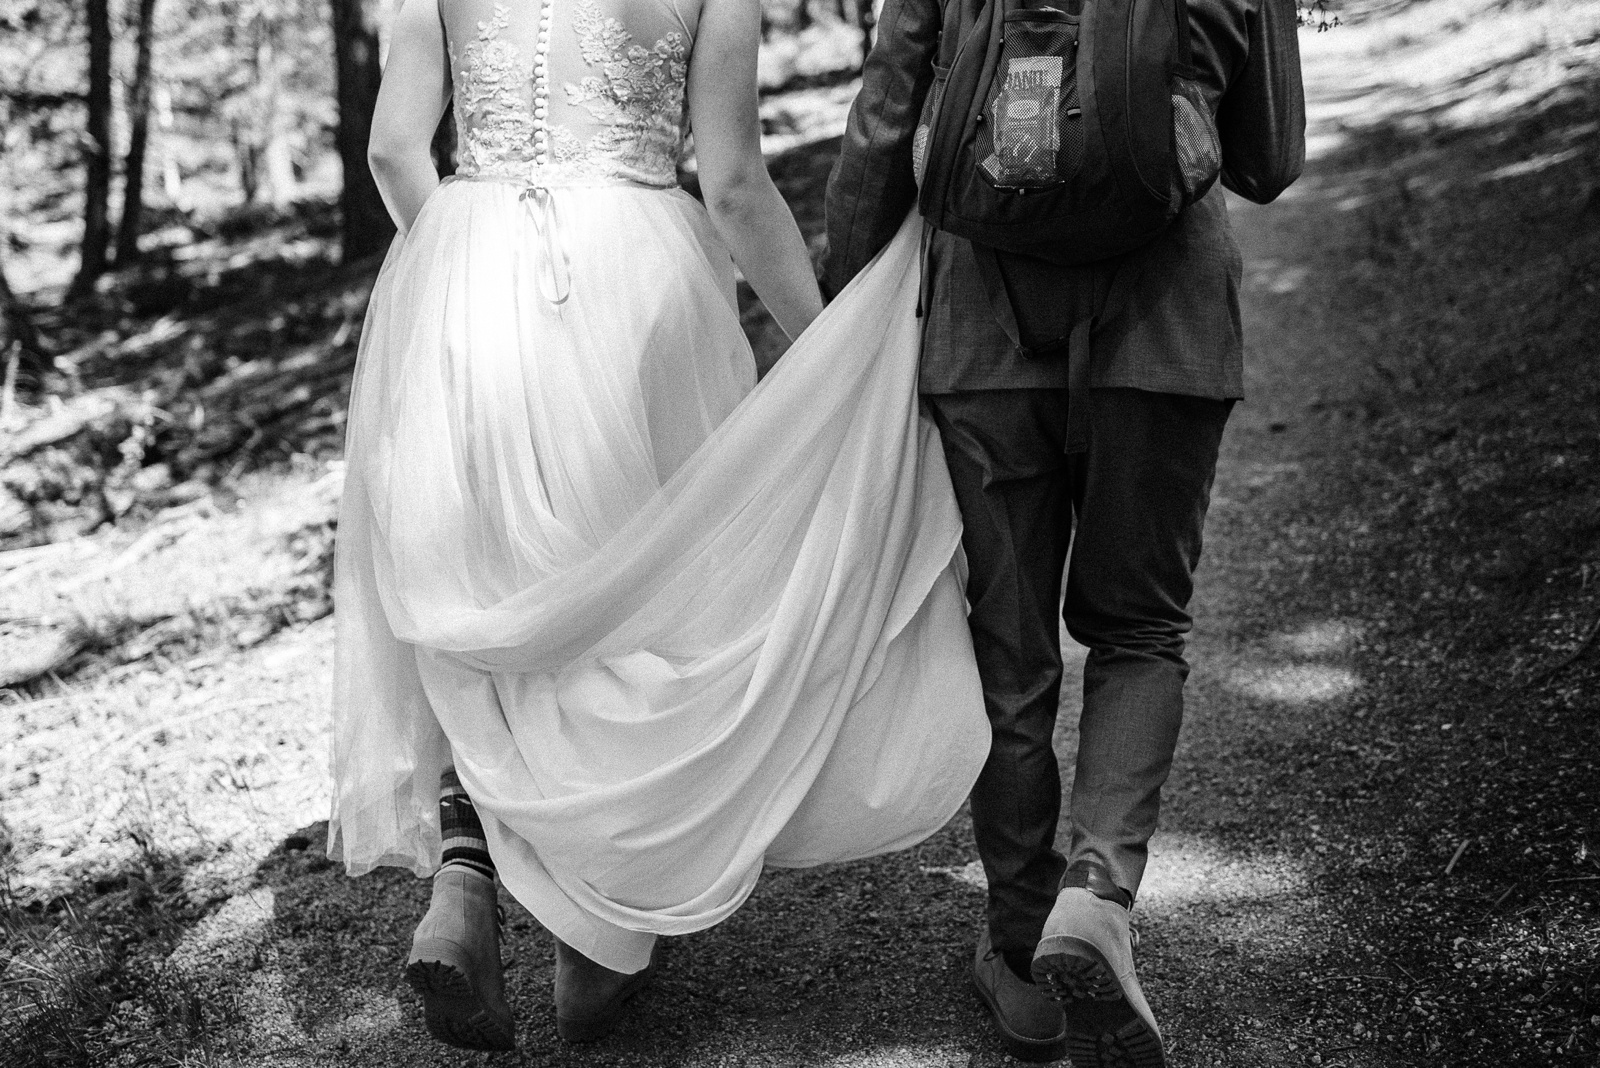 Back of wedding dress and hiking boots